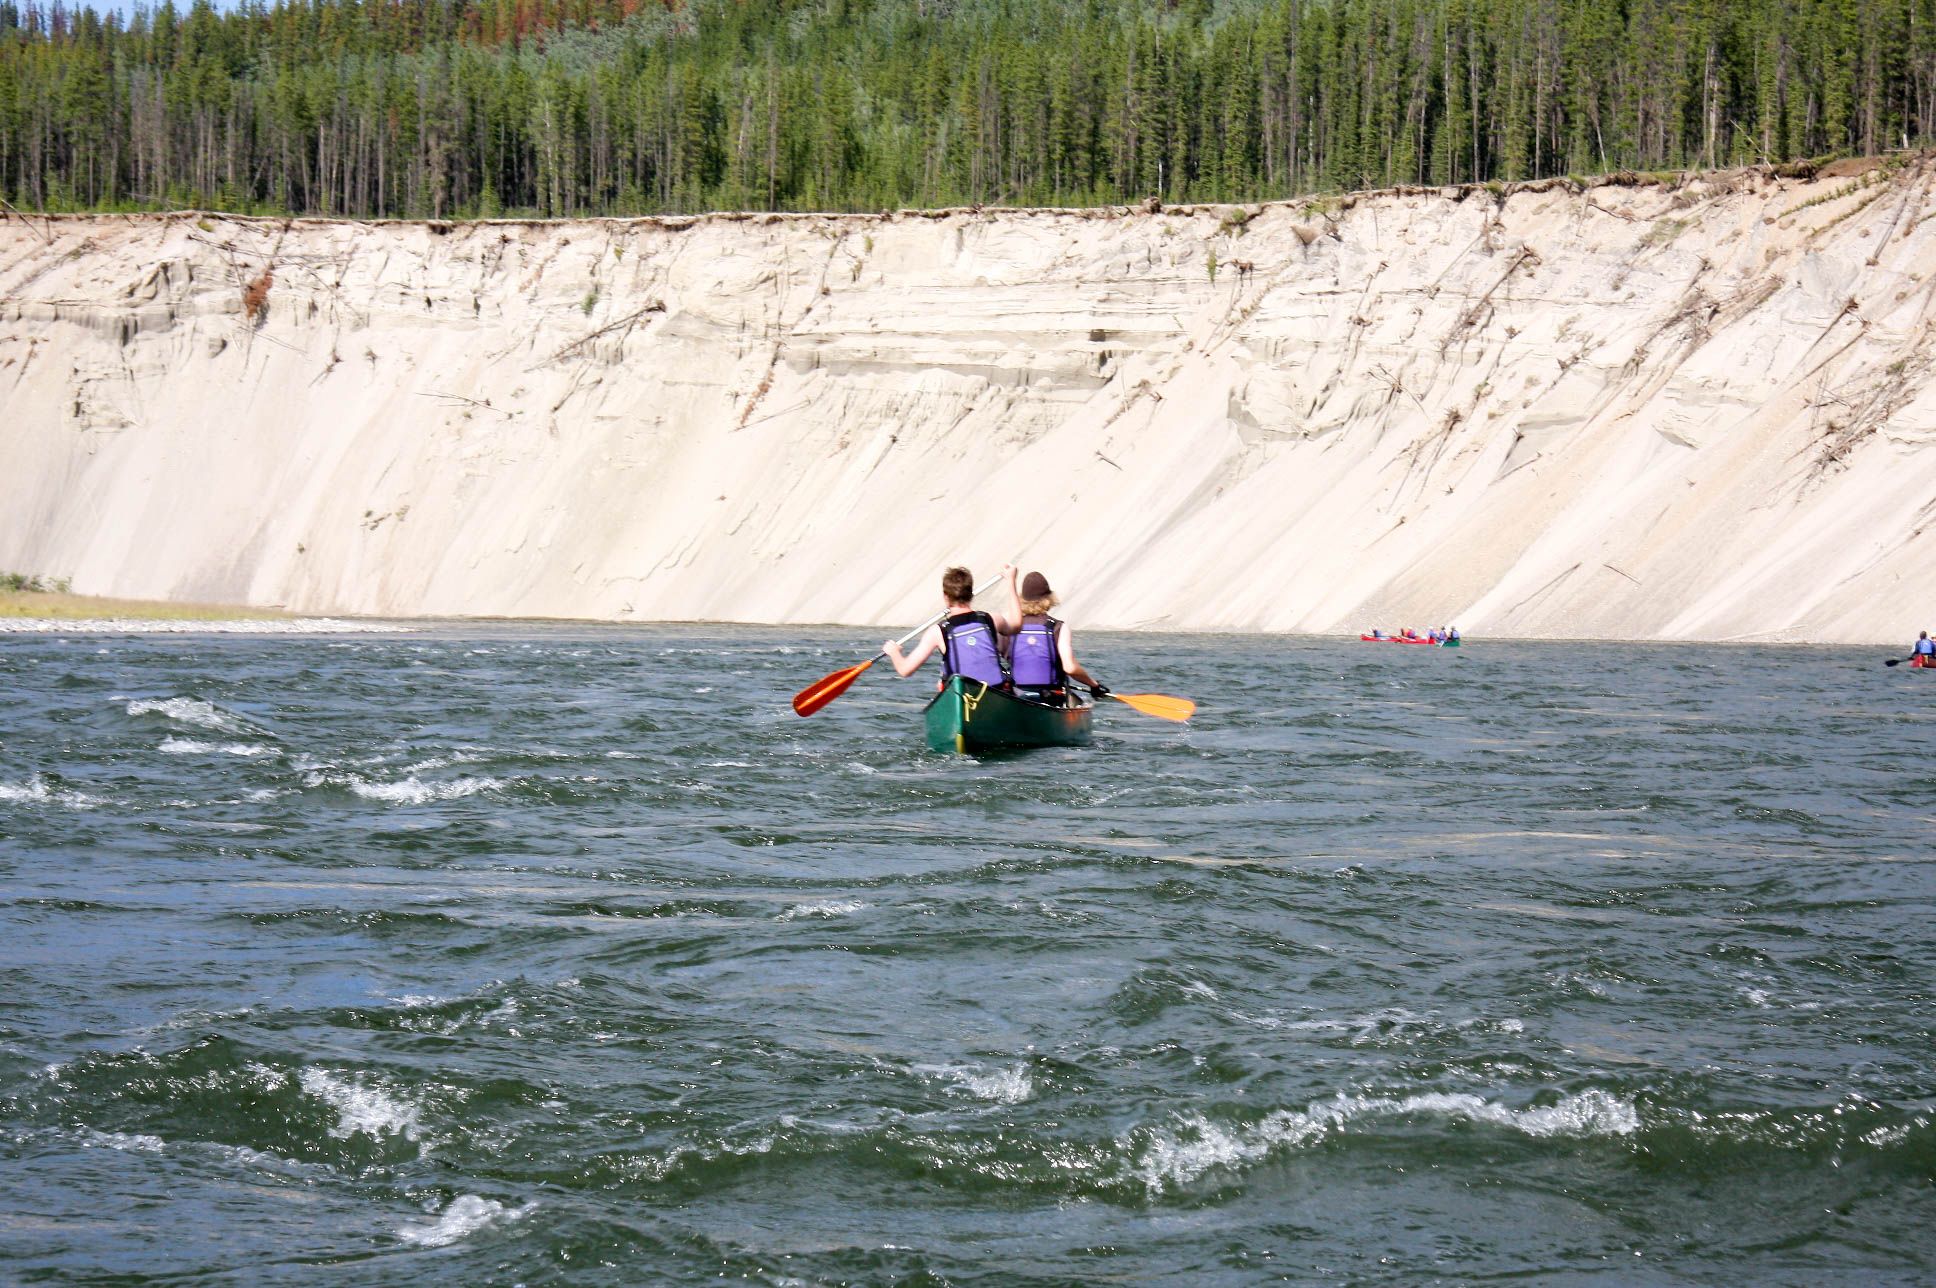 A group of canoeists on choppy waters in the Yukon River.